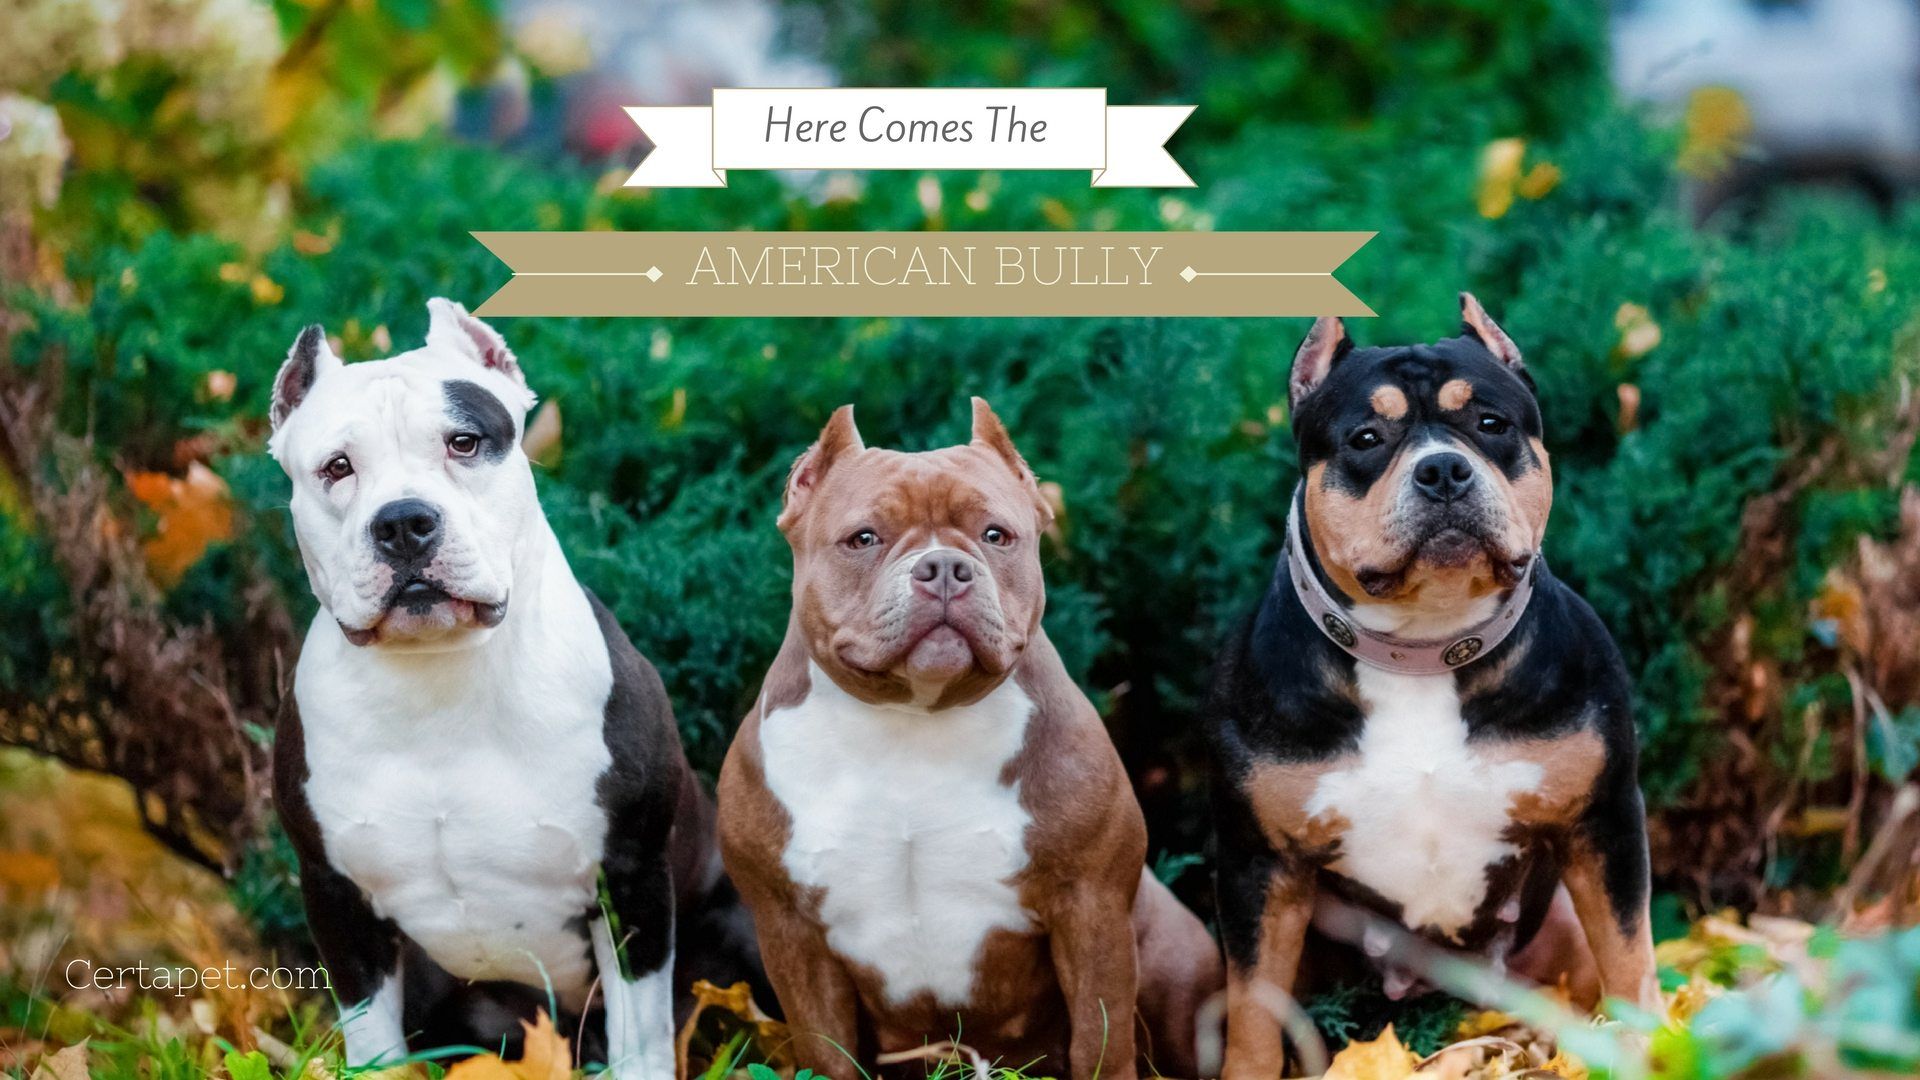 American Bully Wallpapers posted by Samantha Peltier.